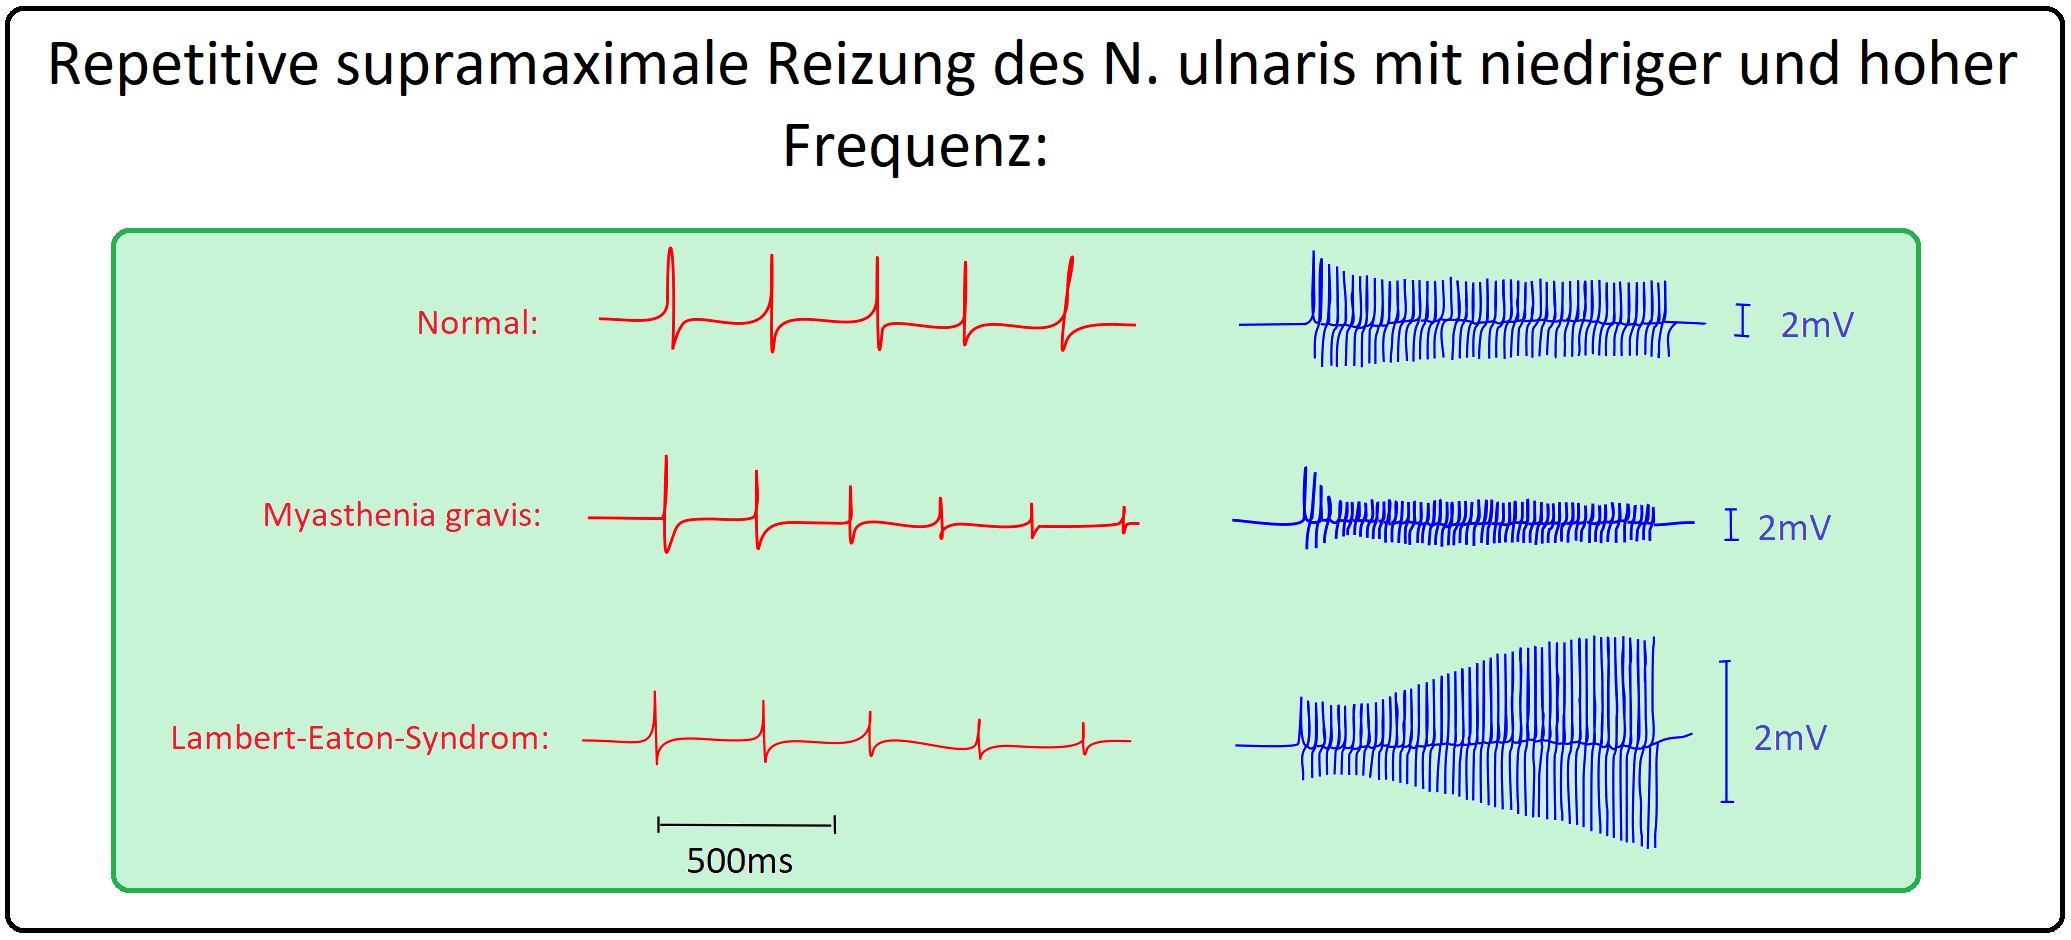 056 Repetitive supramaximale Reizung des N. ulnaris mit hoher